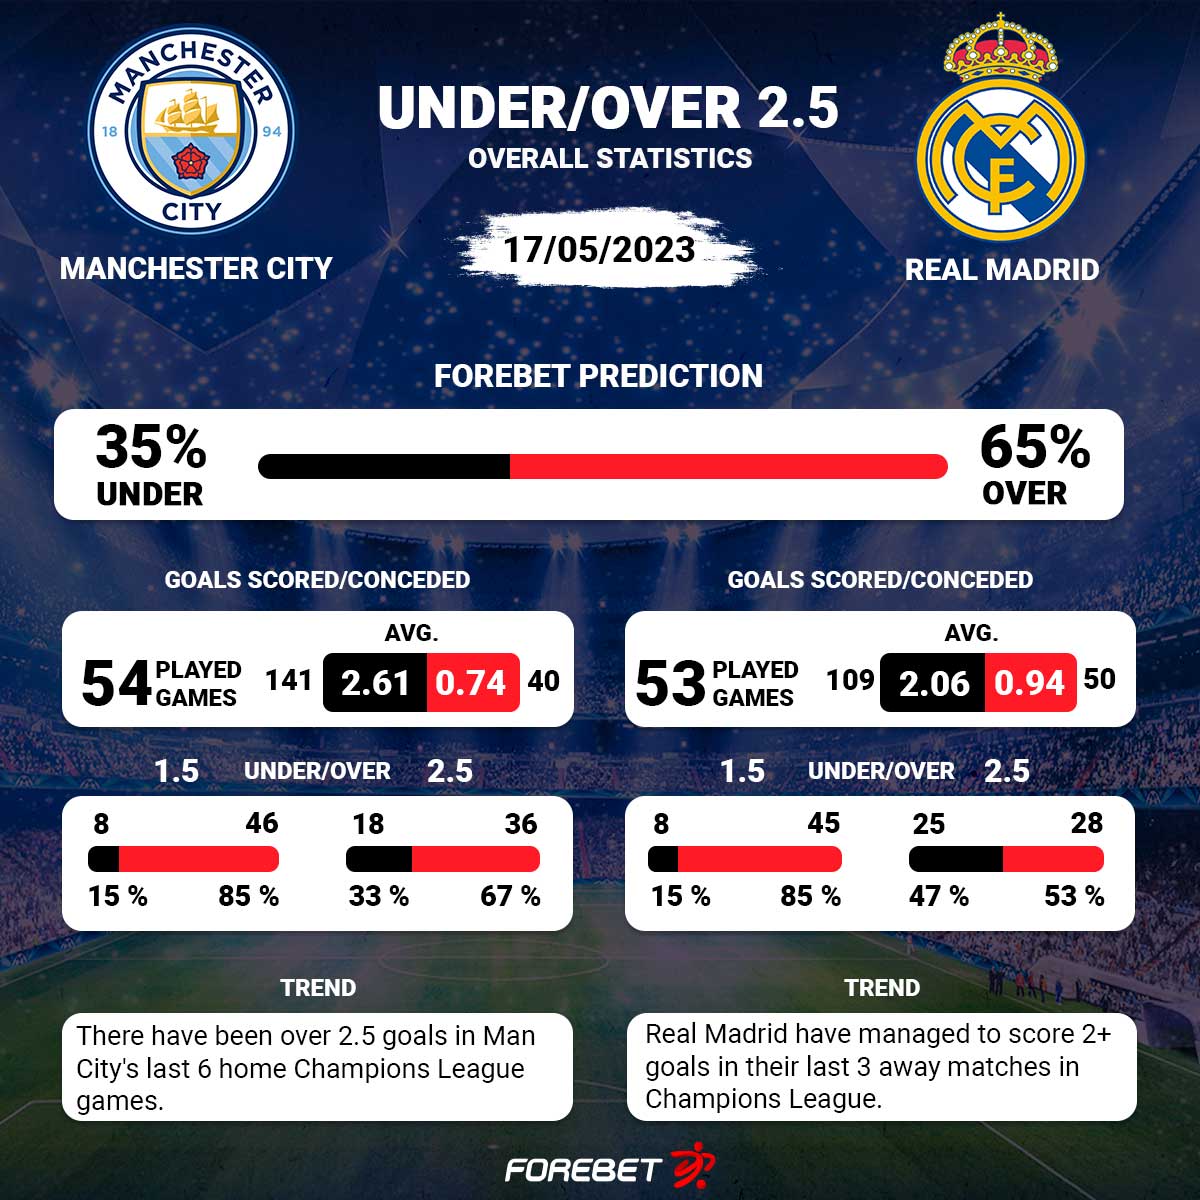 There have been just 1 draw in the last 6 matches between Manchester City and Real Madrid.

📊 More predictions and stats: bit.ly/3pLsYt5

#UCL #MCIRMA #forebet